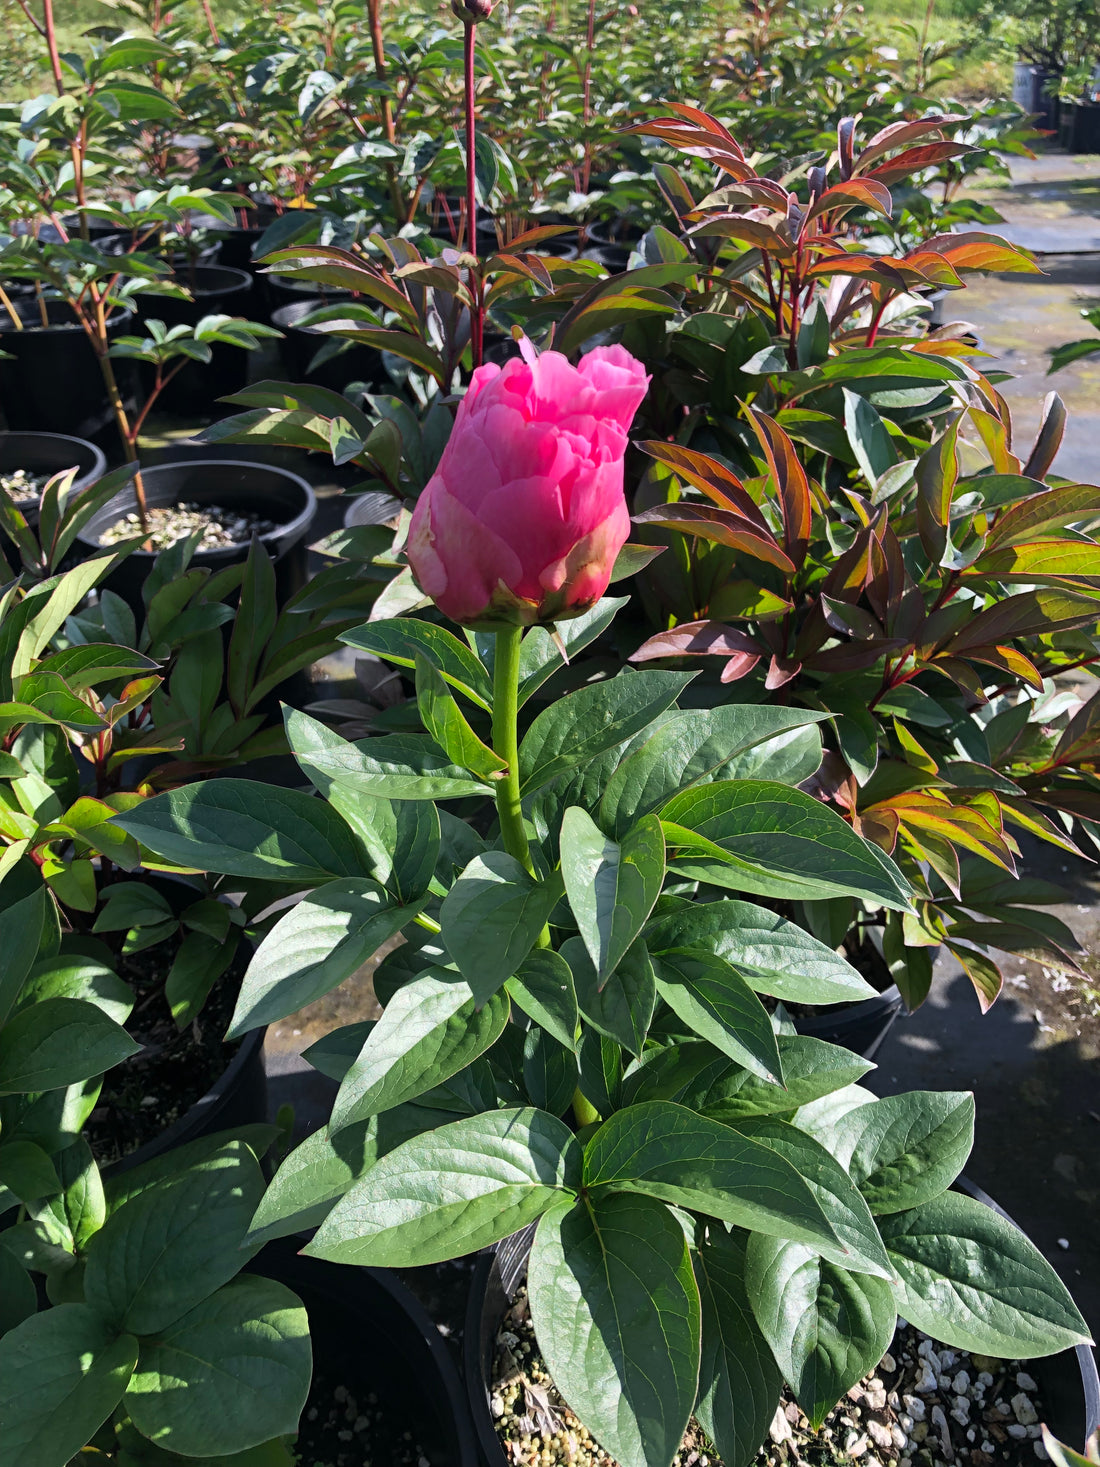 What peony varieties do we have in containers at the farm this year?